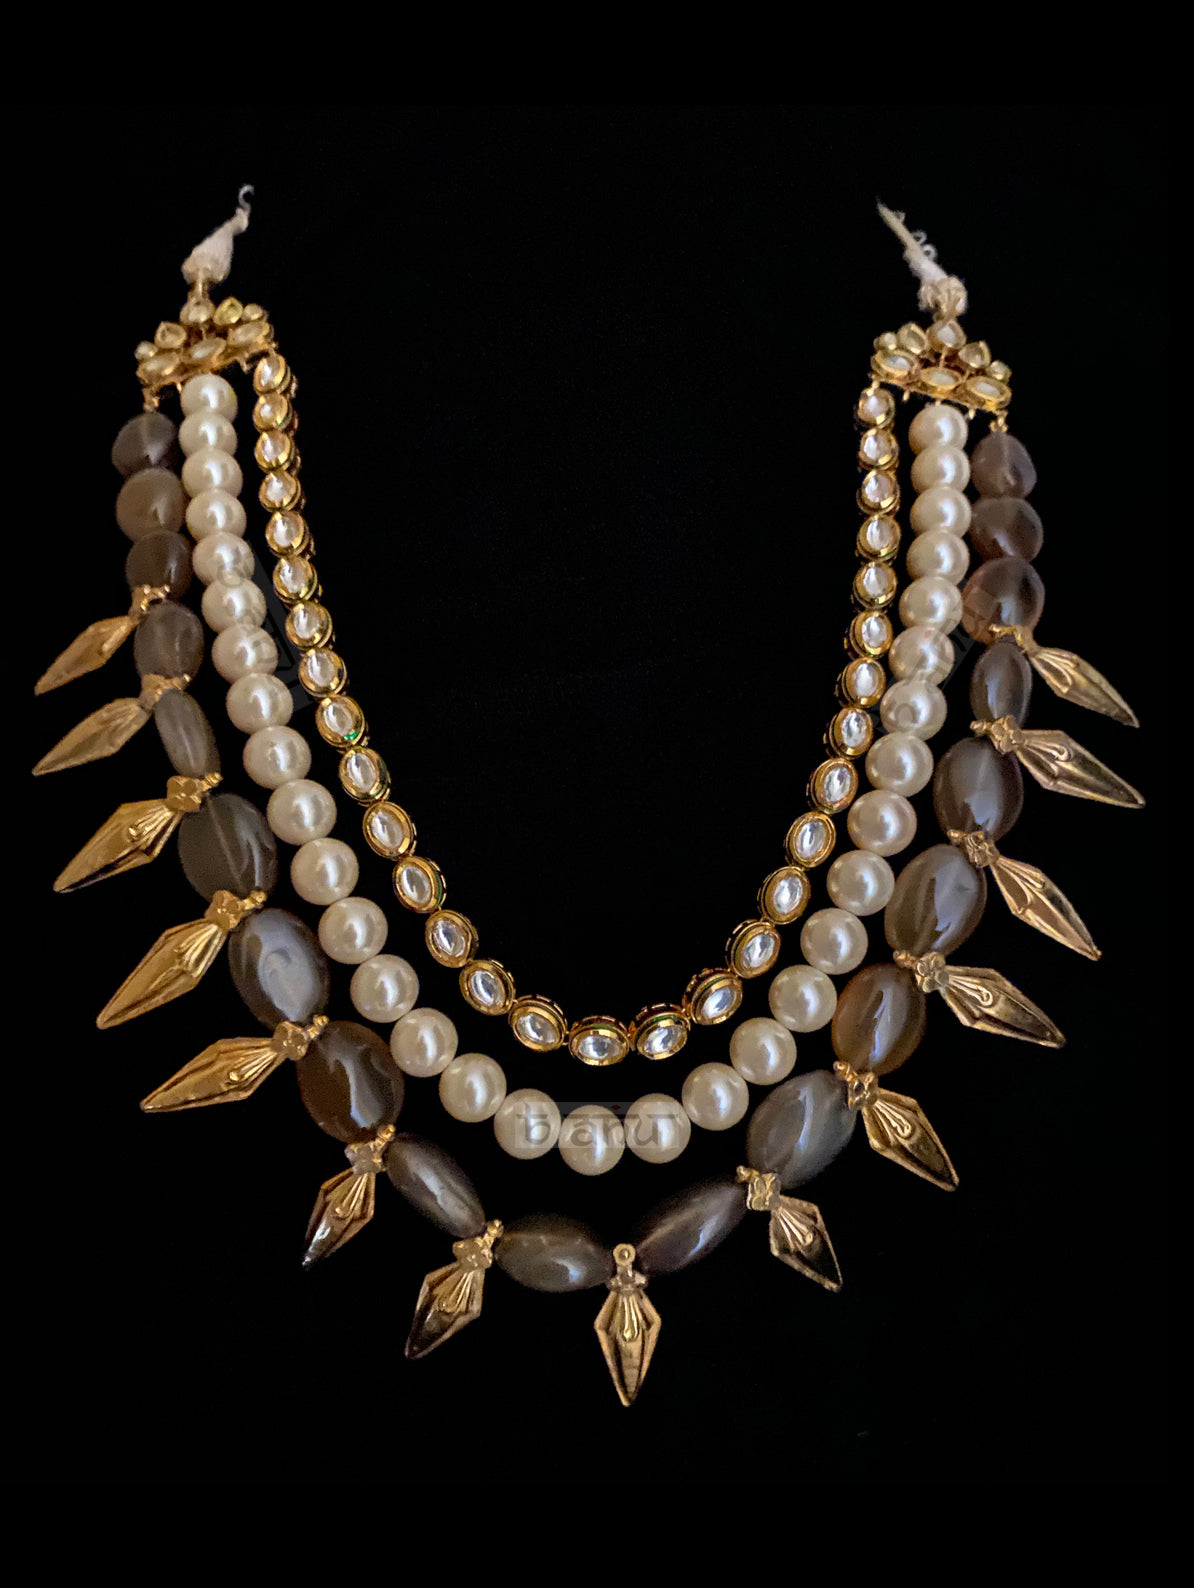 Garland Statement Necklace with  Grey Onyx, Pearls And Gold Enhancements - bAnuDesigns